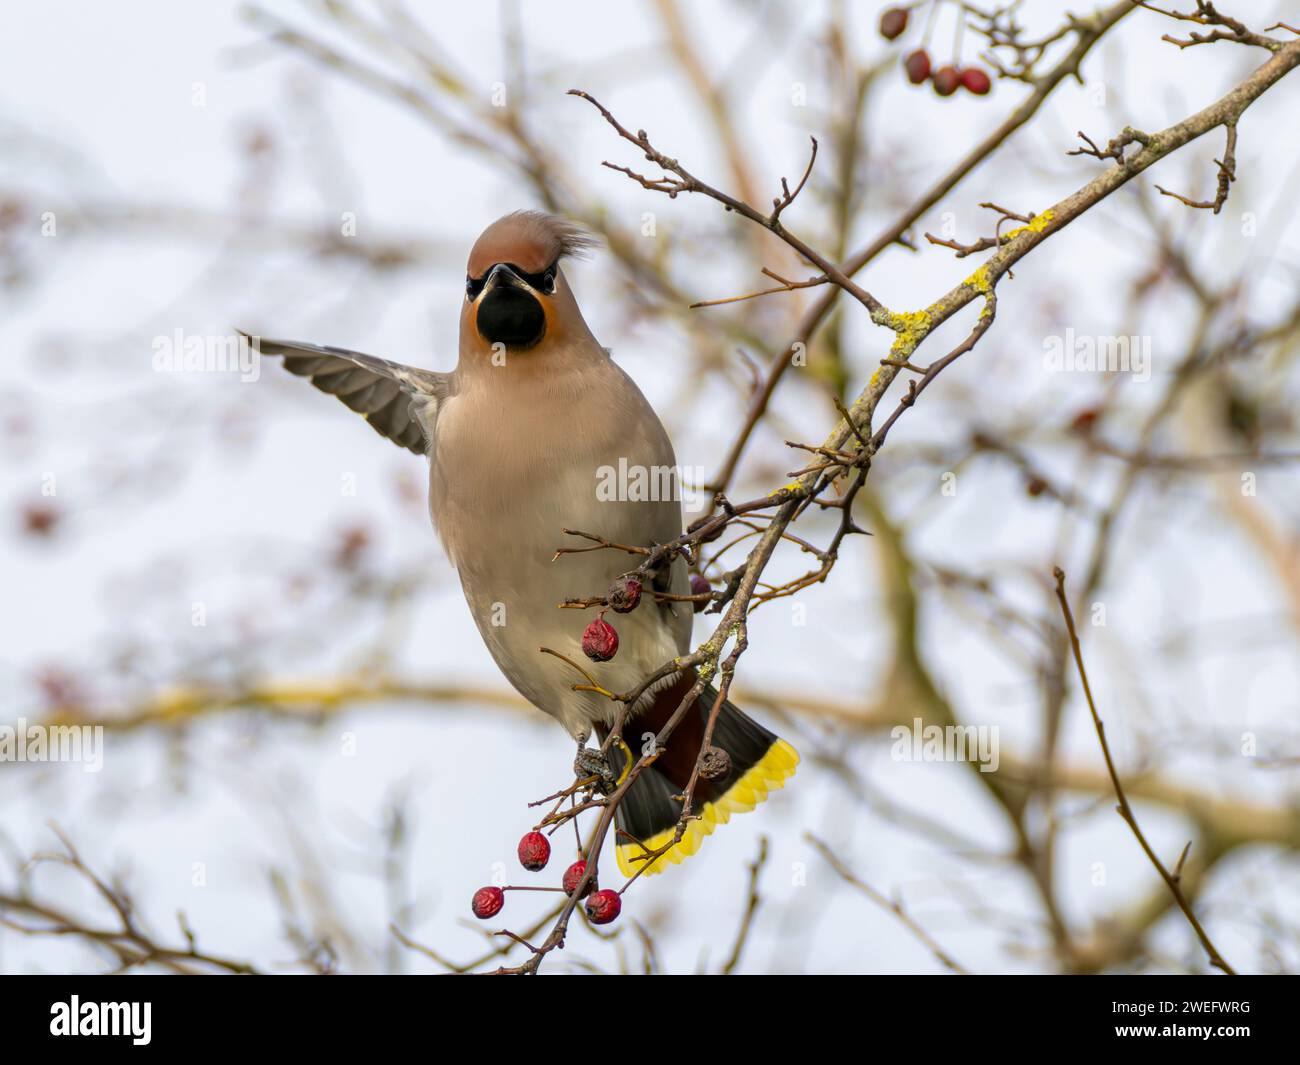 Waxwing, Bombycilla garrulus, perched on tree branch pointing with wing Stock Photo